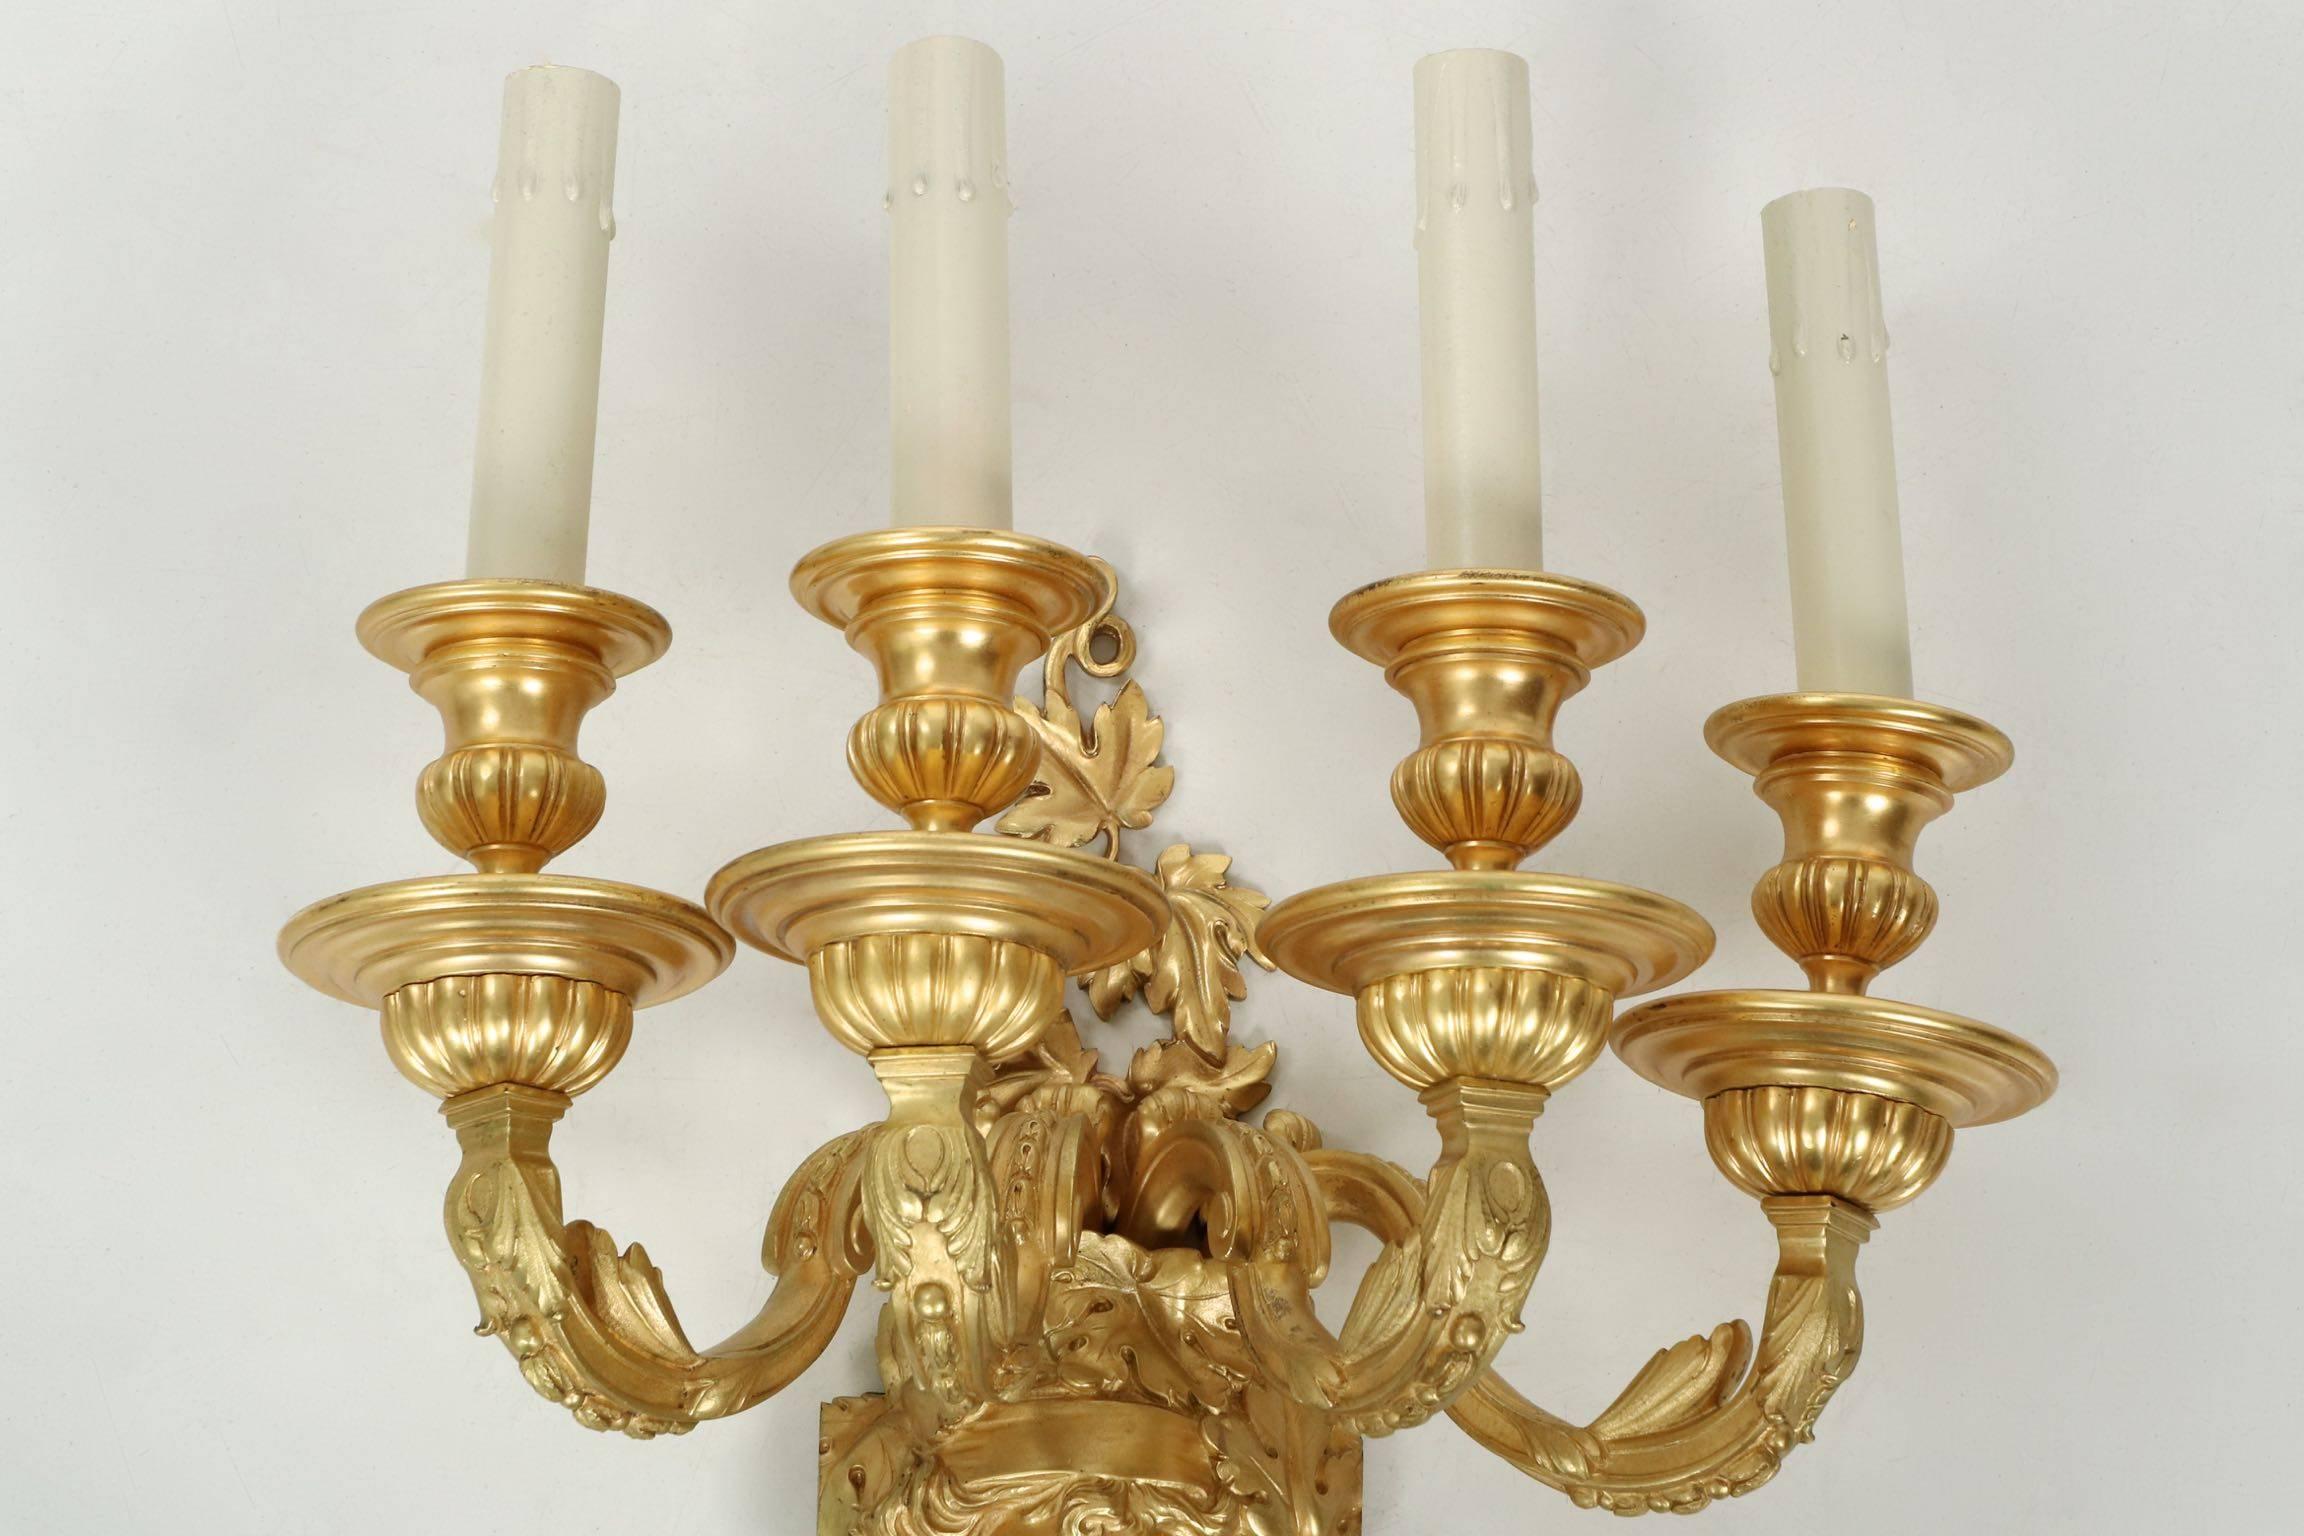 In every way exceeding expectations, this very fine pair of gilt bronze sconces is a testament to the fine casting skill developed on this side of the Atlantic during the 19th century. The firm of Mitchell, Vance & Co. was founded in 1845 and by